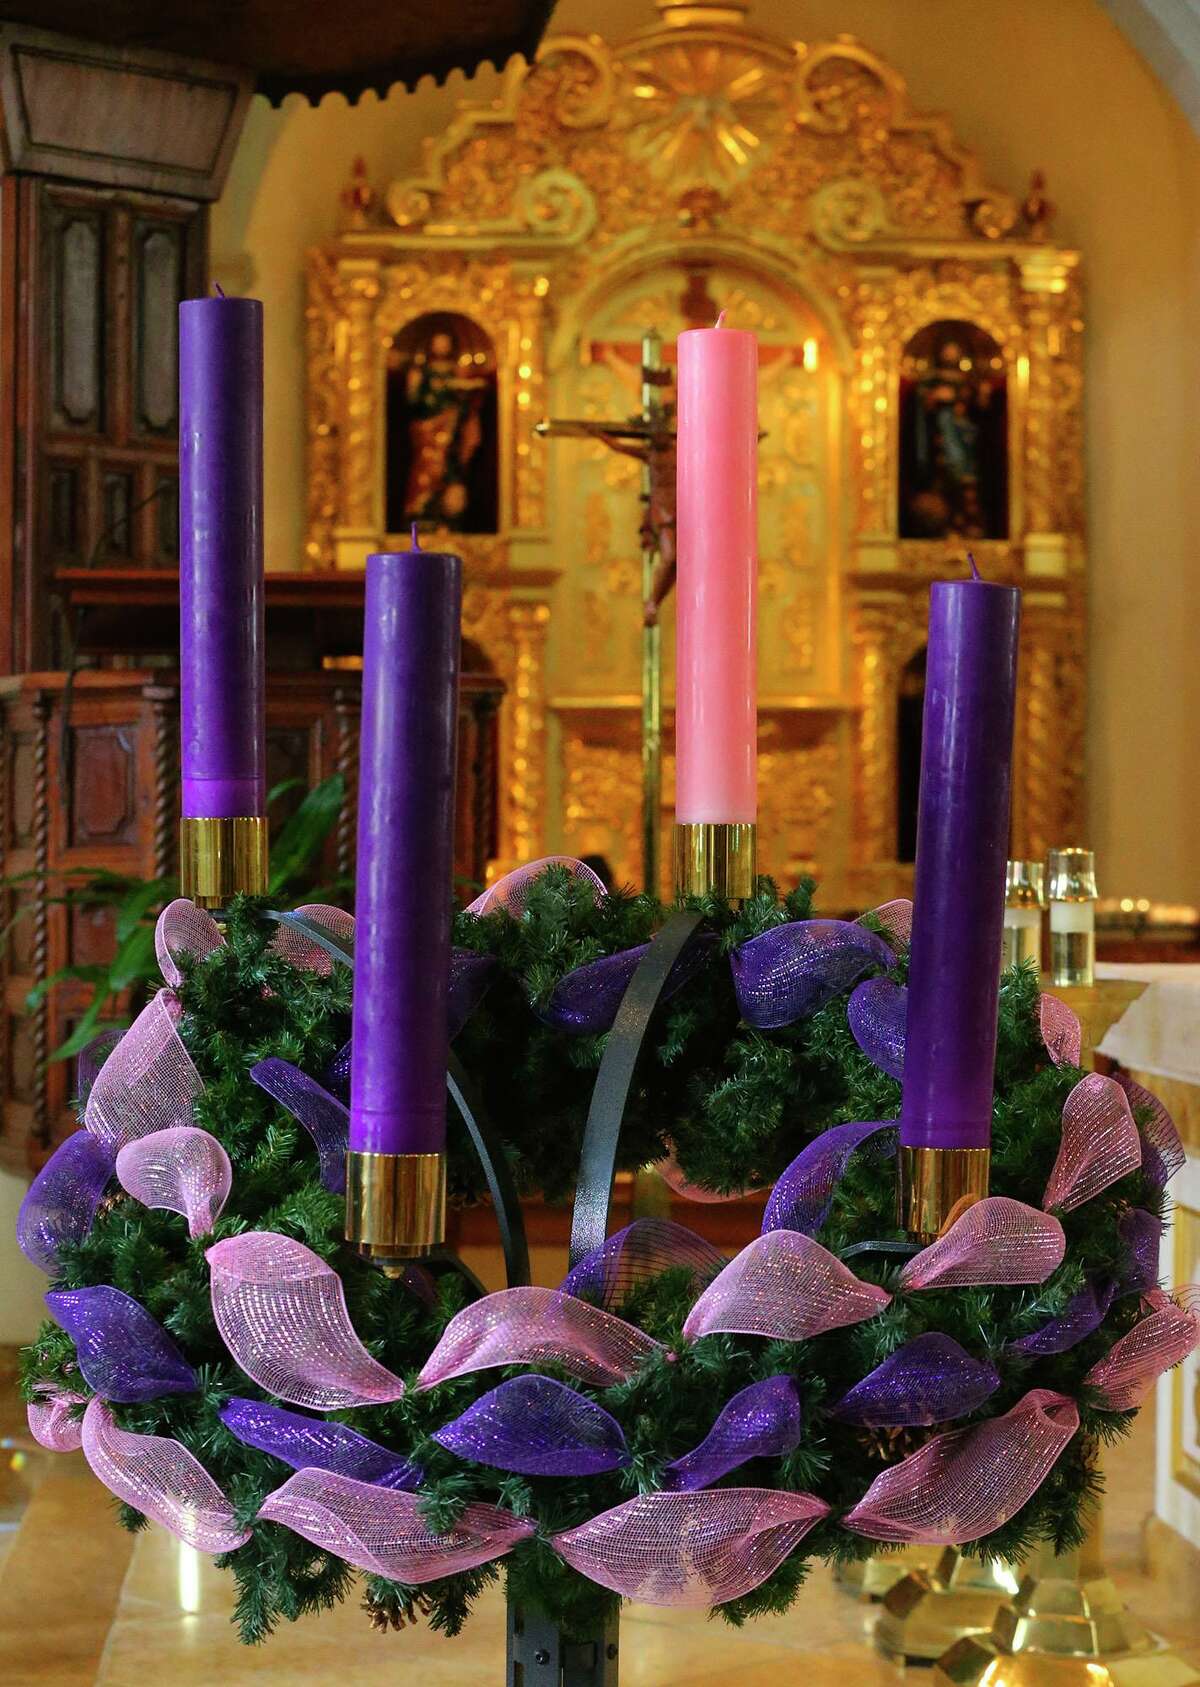 For four Sundays Christians mark the anticipation of the coming of Christ and for his second return. The Advent wreath is symbolic of this tradition.